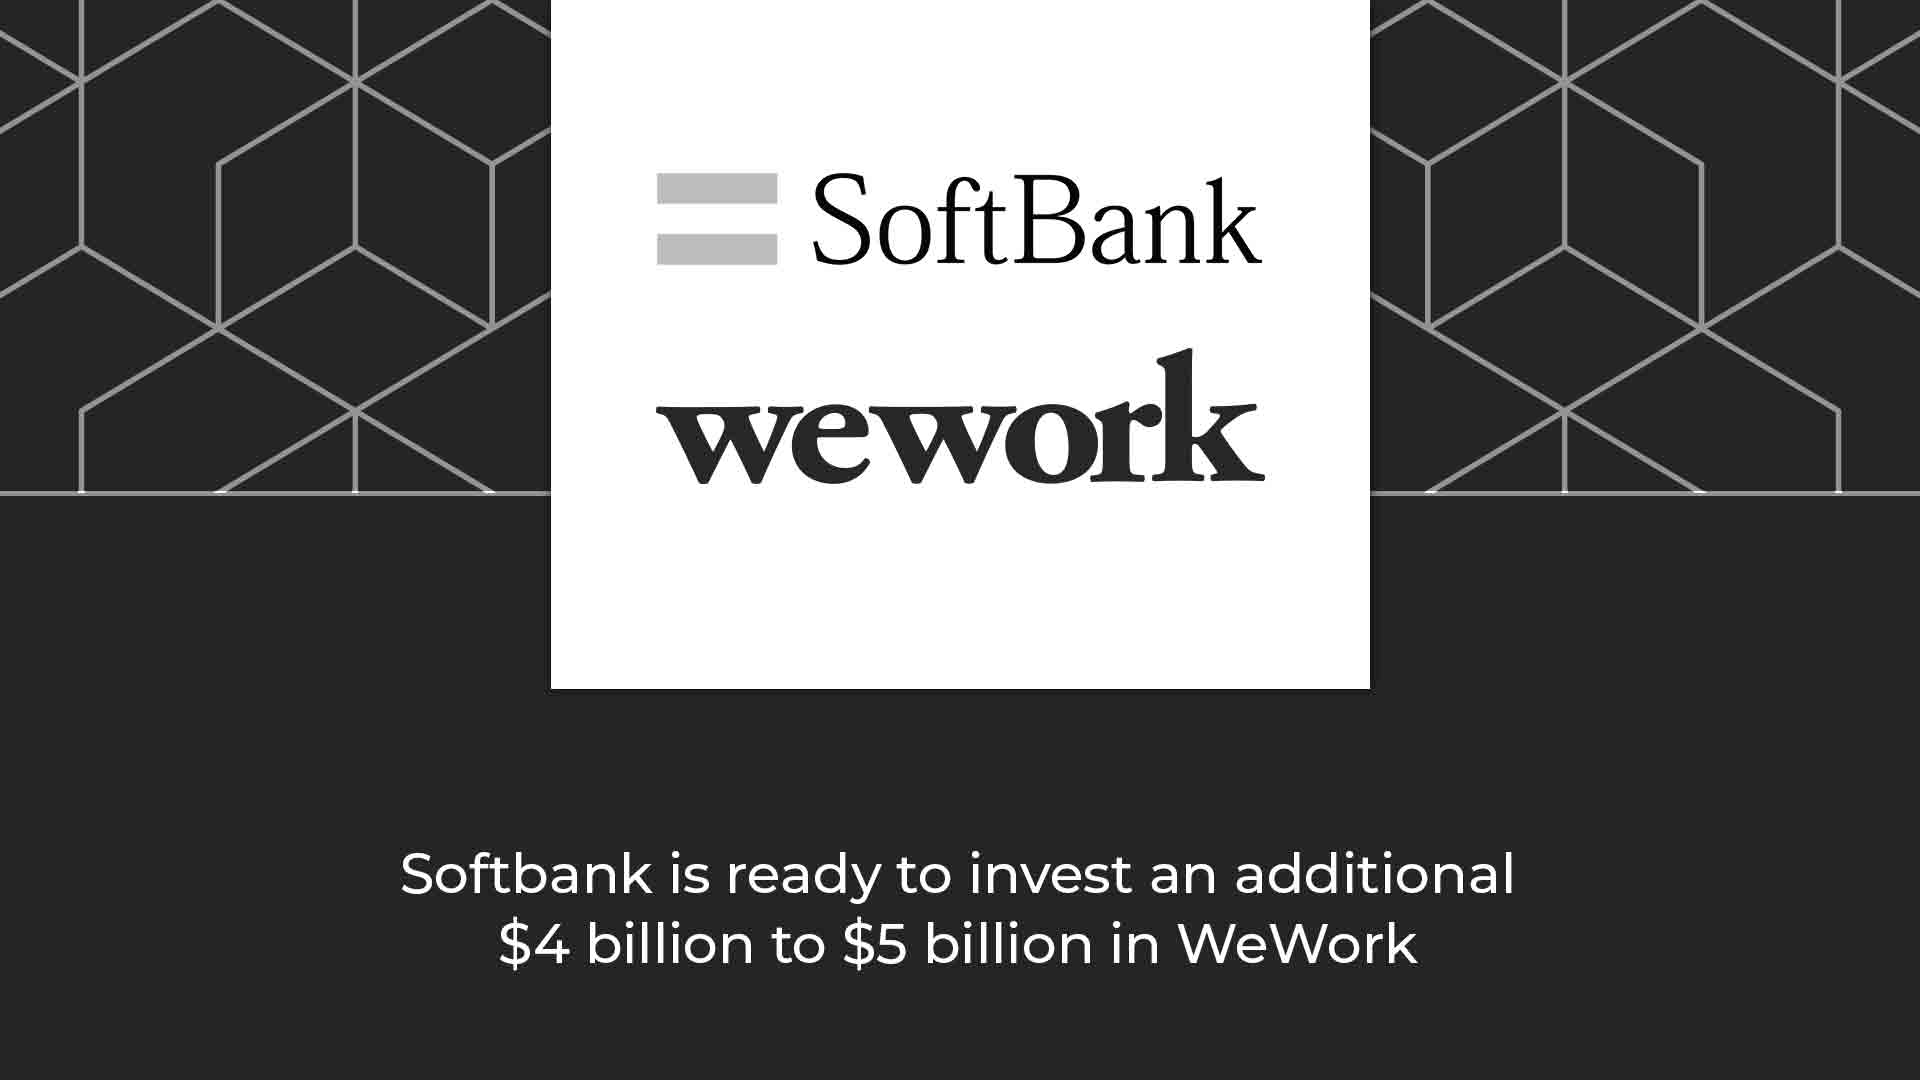 Softbank is ready to invest additional 4 million